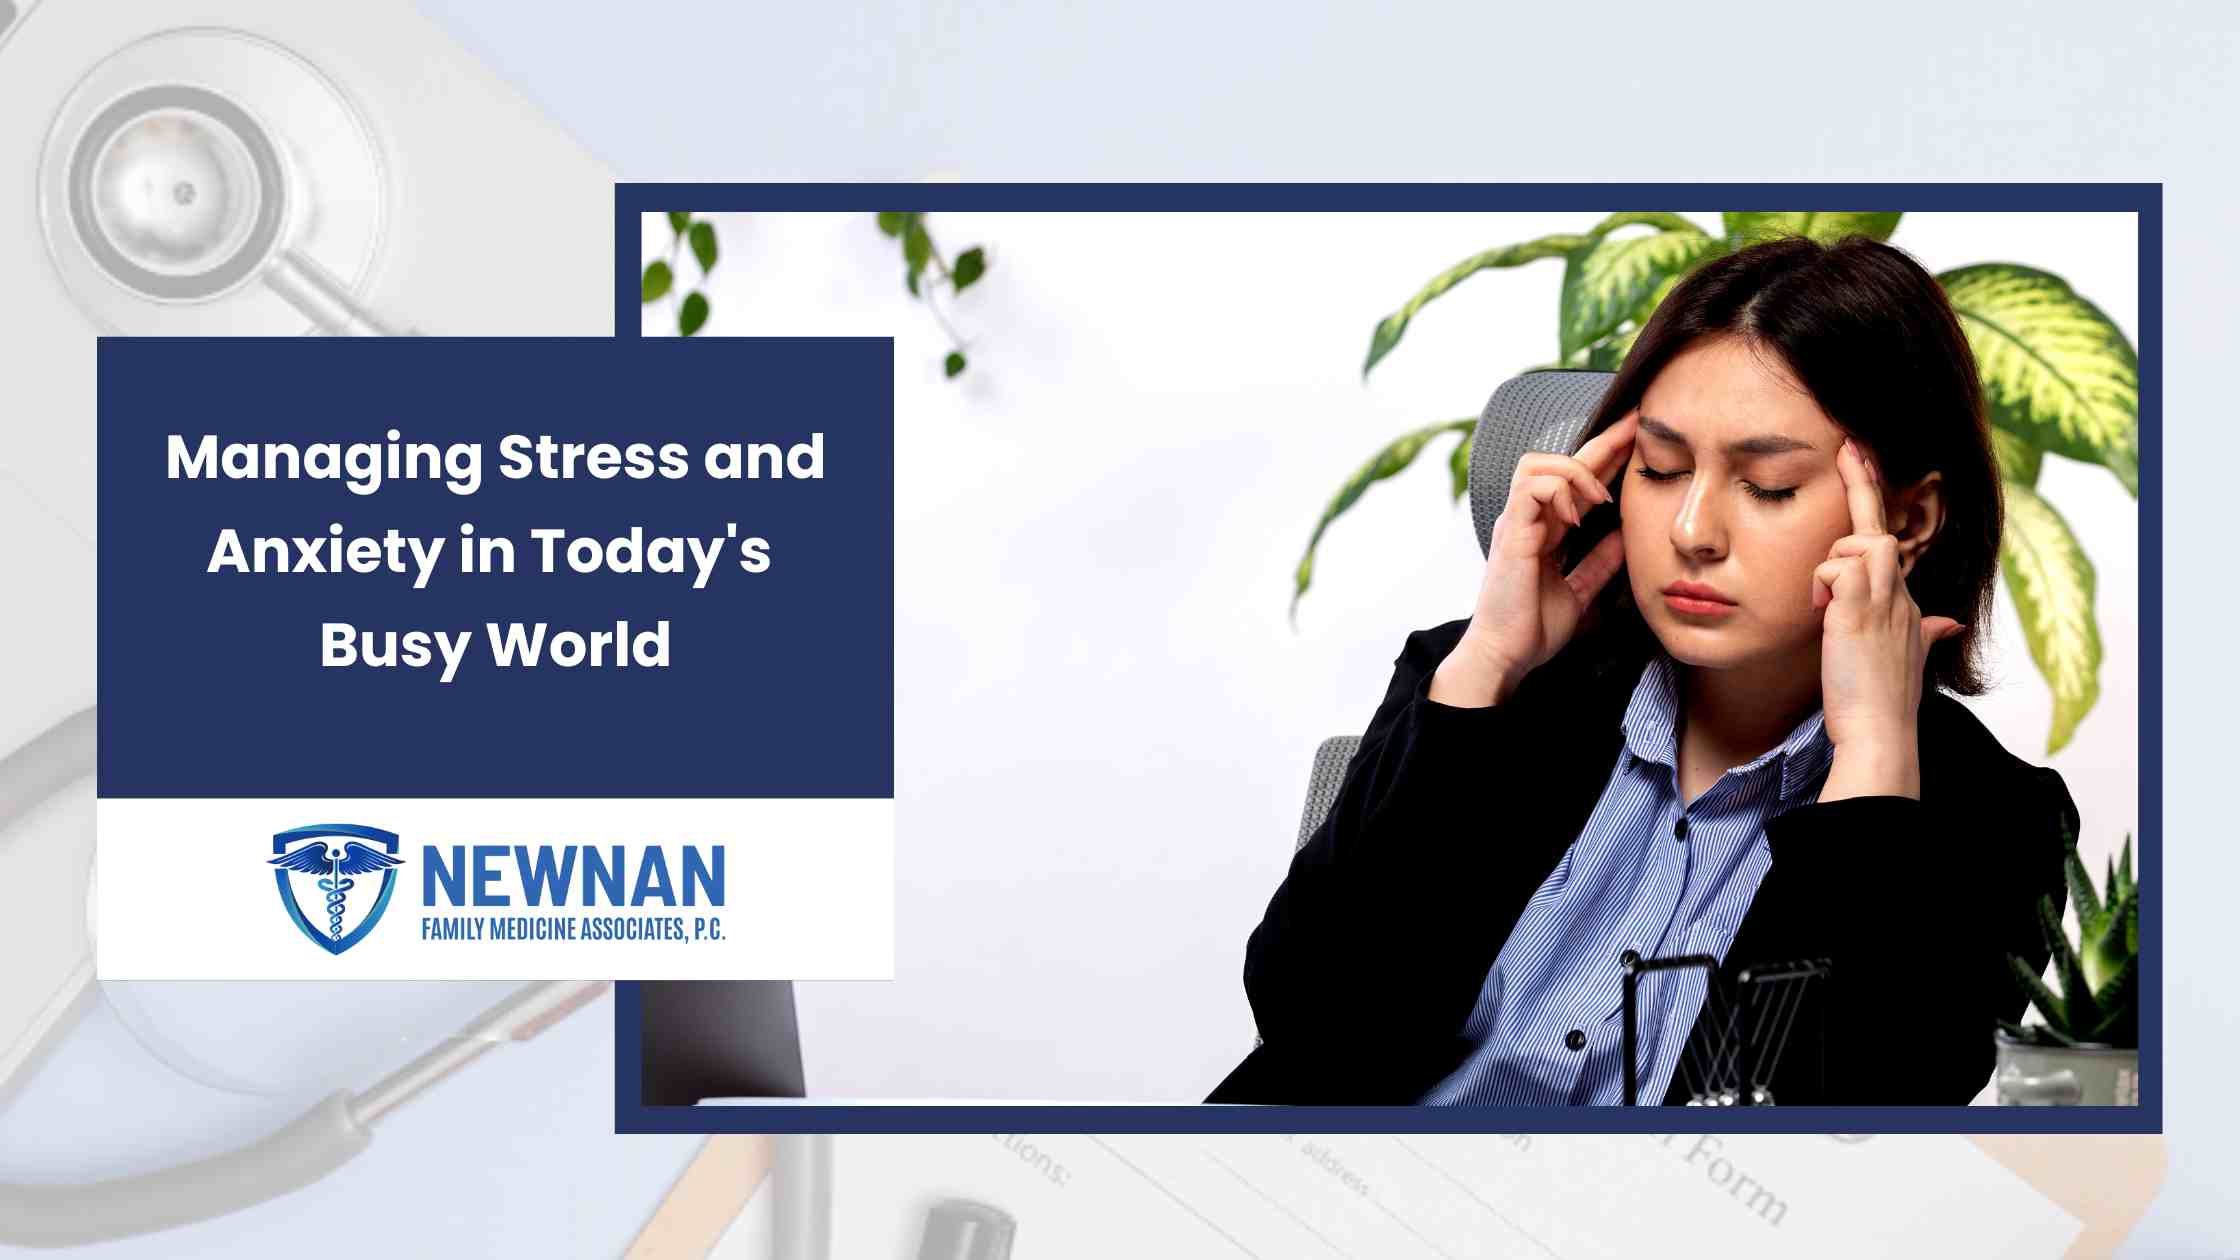 Managing Stress and Anxiety in Today's Busy World